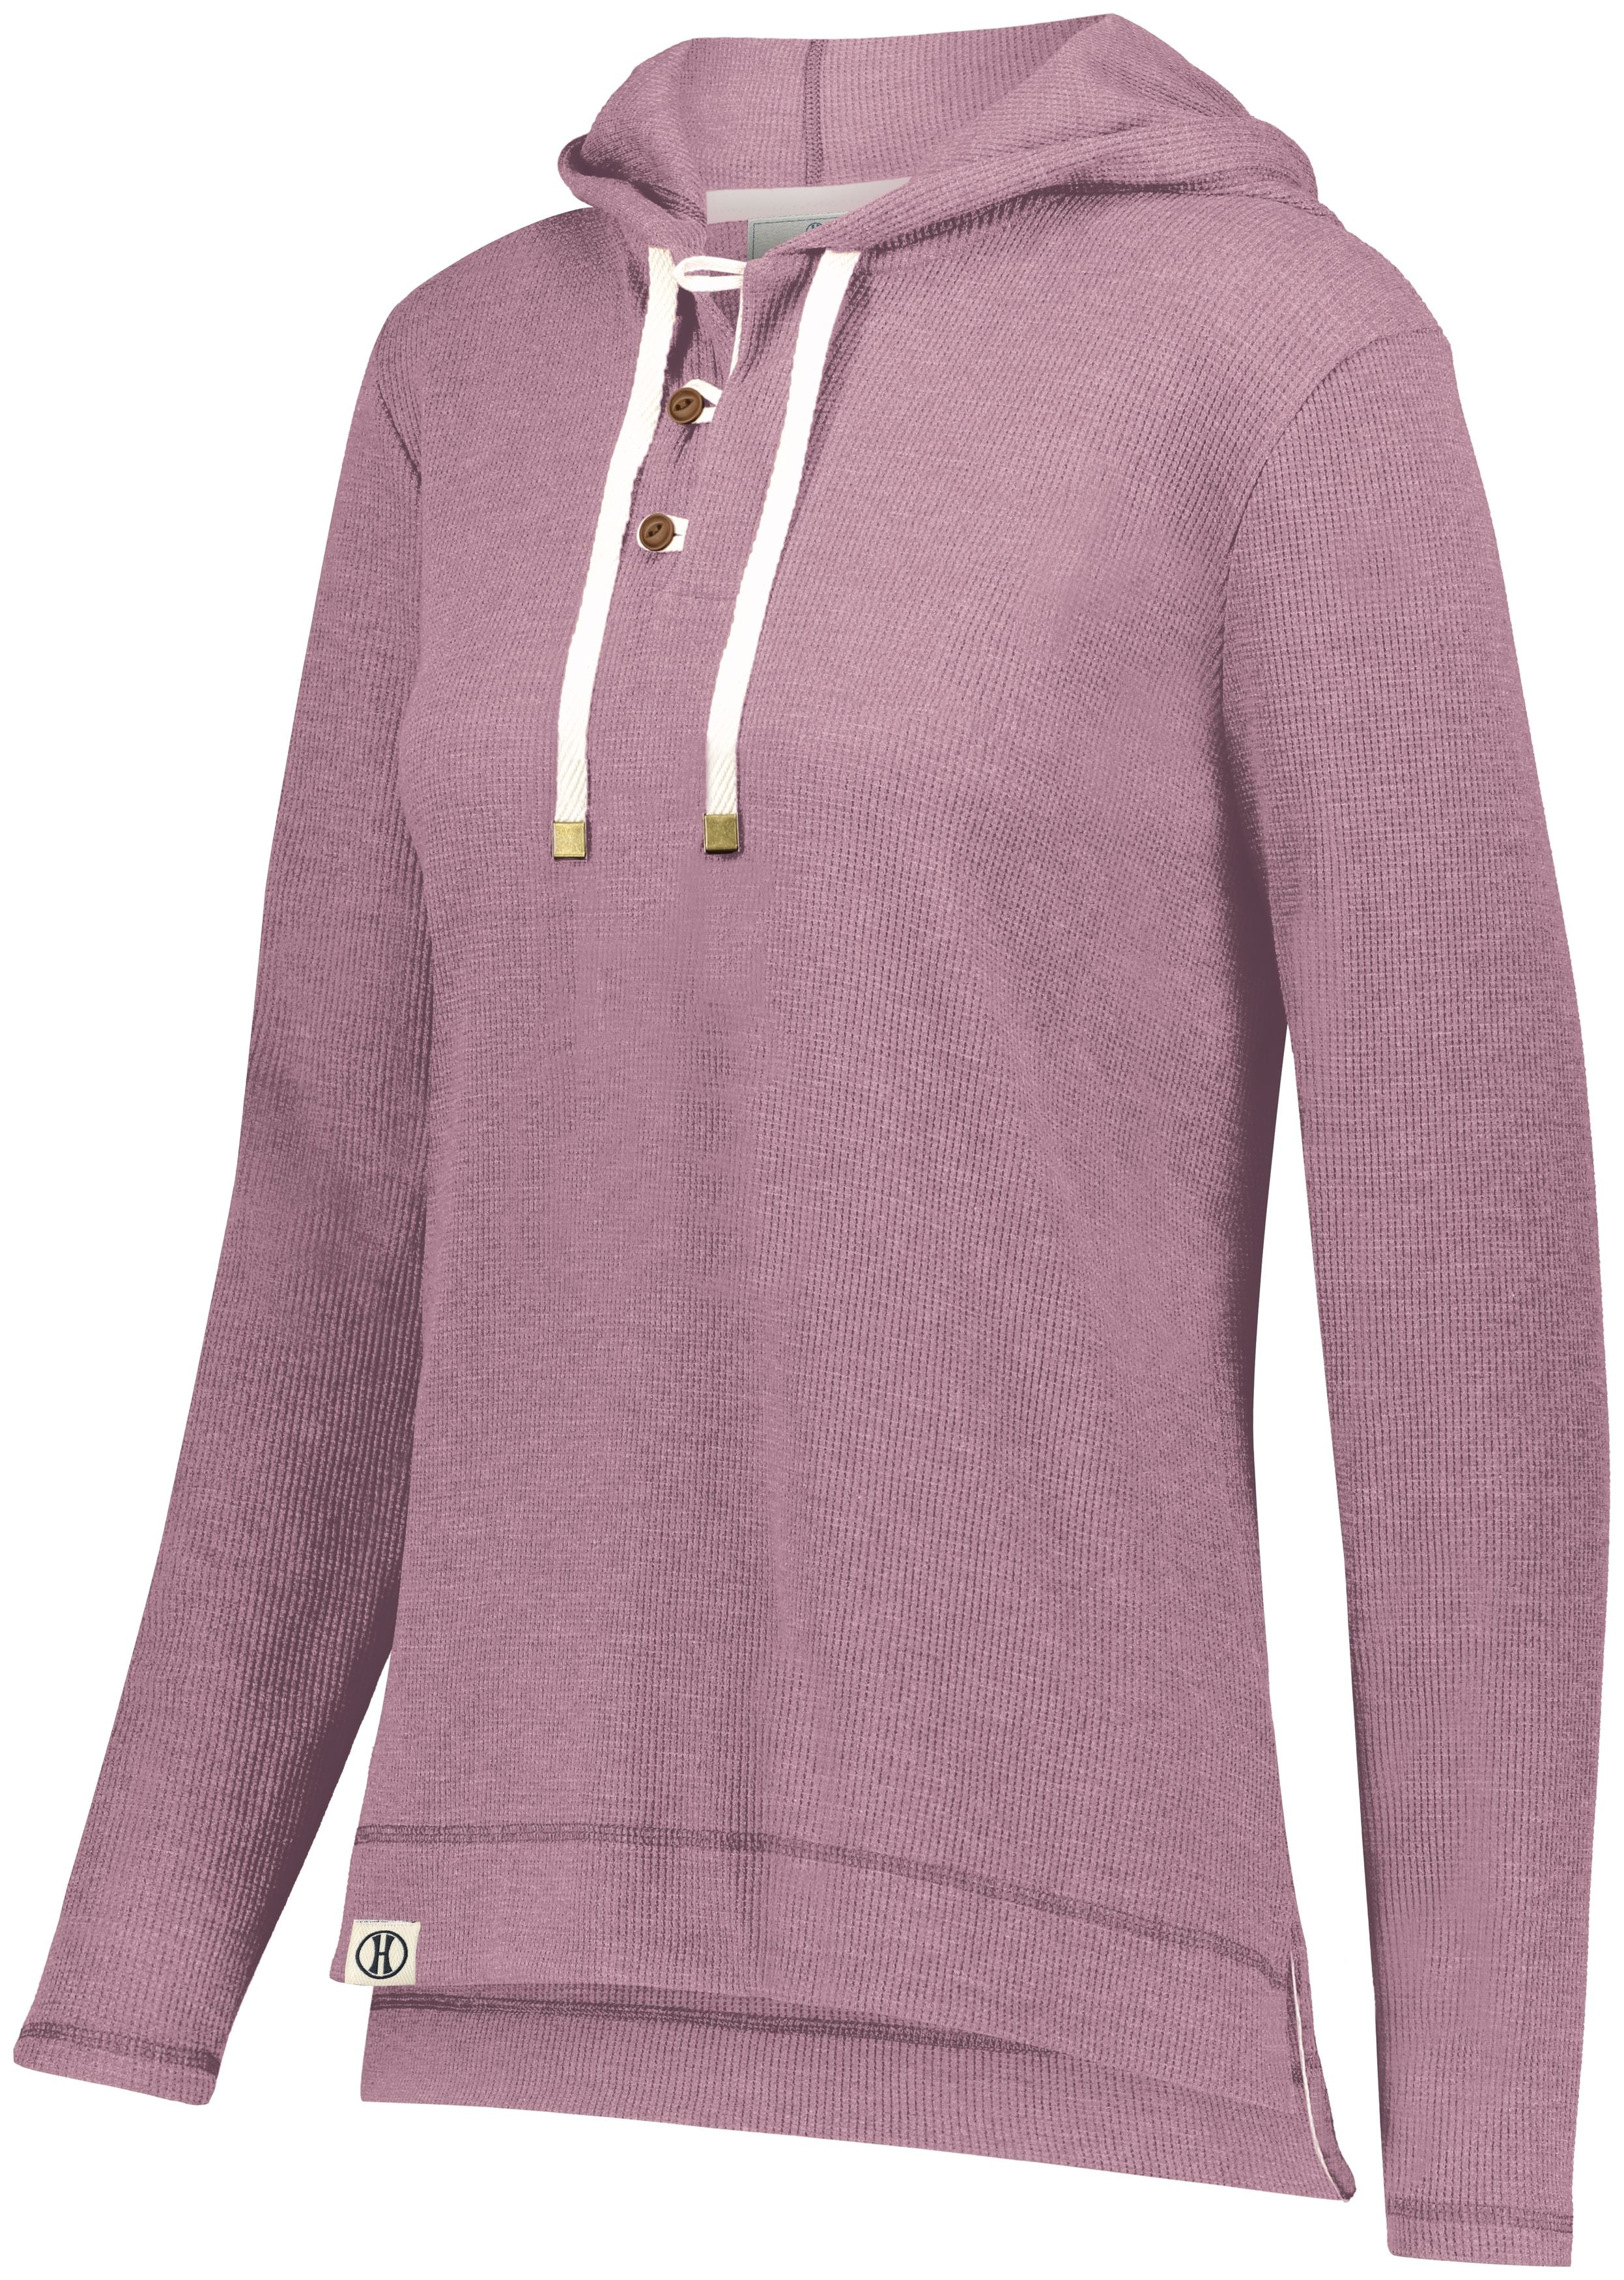 Holloway Ladies Coast Hoodie in Dusty Rose Heather  -Part of the Ladies, Holloway, Shirts product lines at KanaleyCreations.com